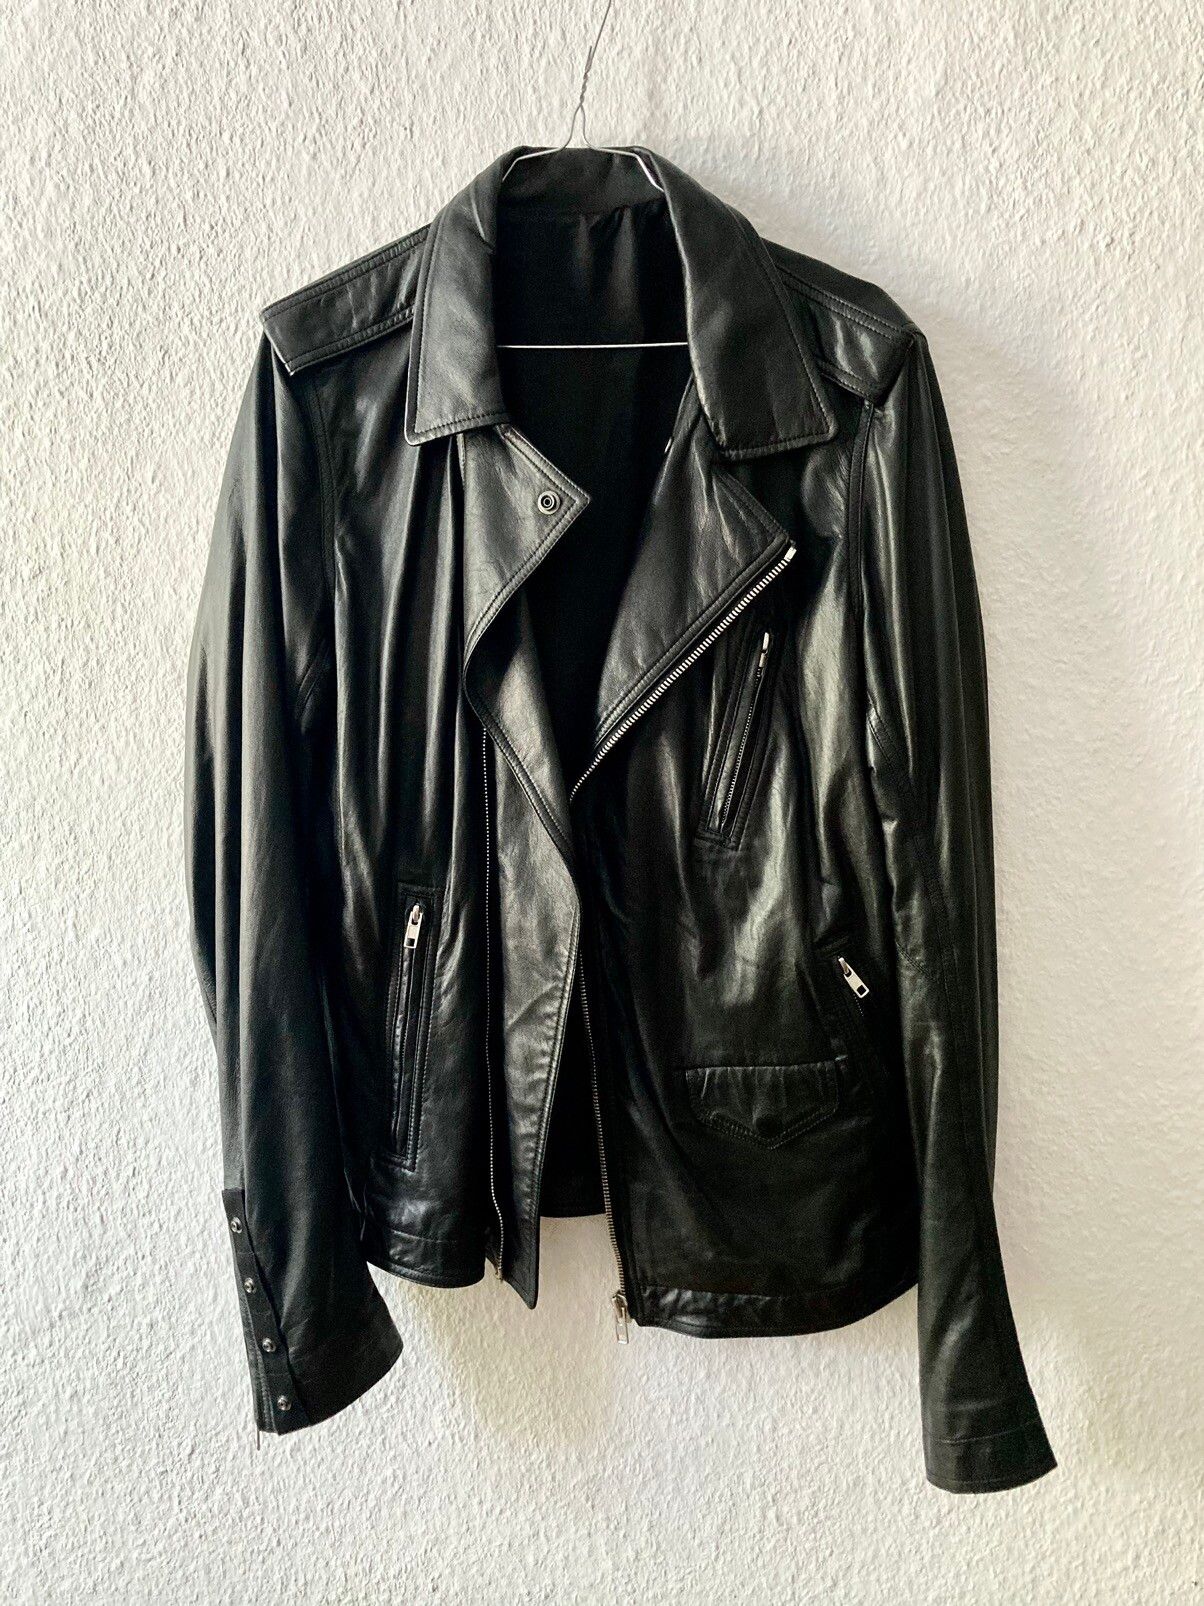 Rick Owens Rick Owens S/S 15 FAUN Stooges Leather Jacket Size 52 | Grailed